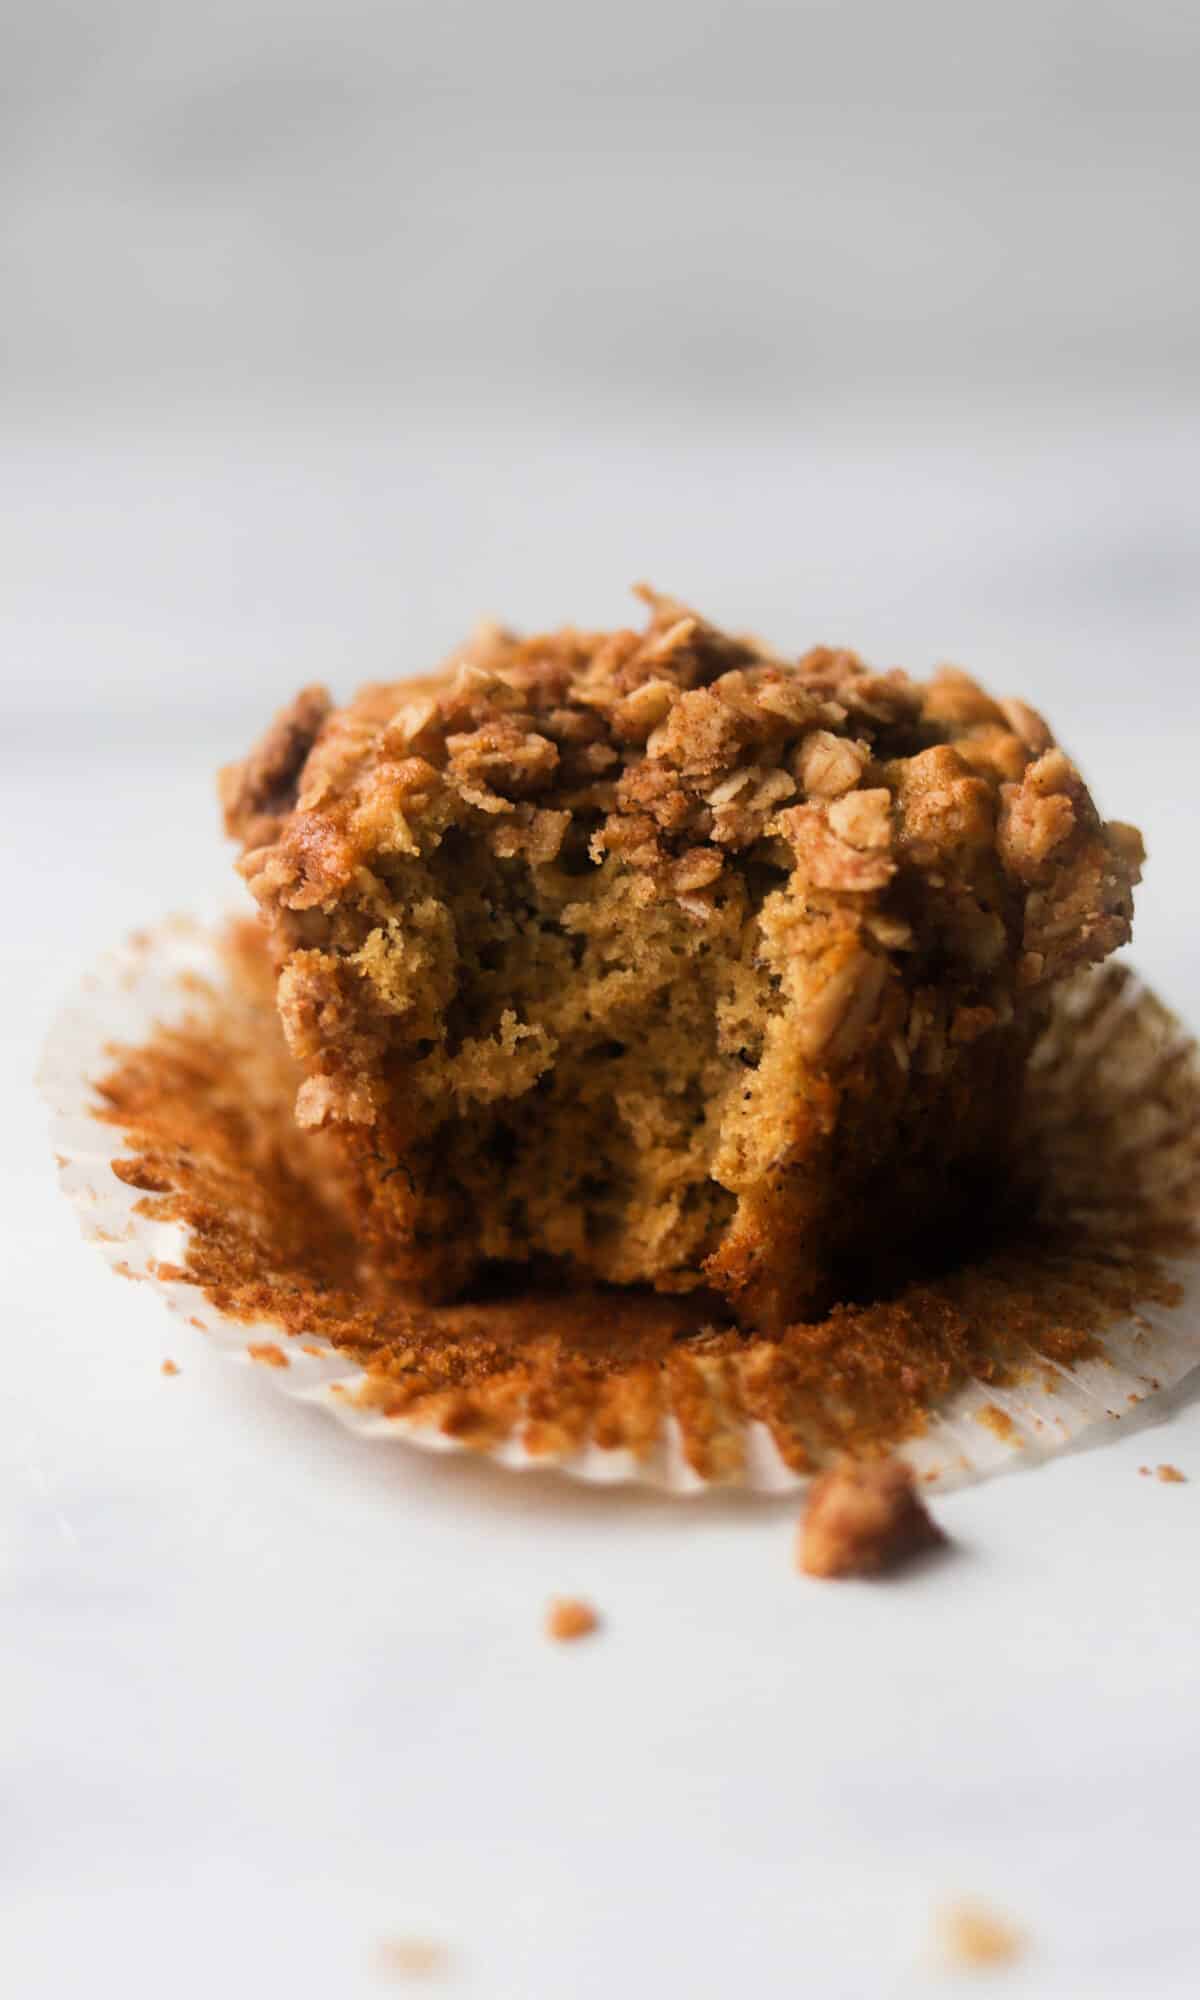 A side shot of a muffin with a bite taken out of it.